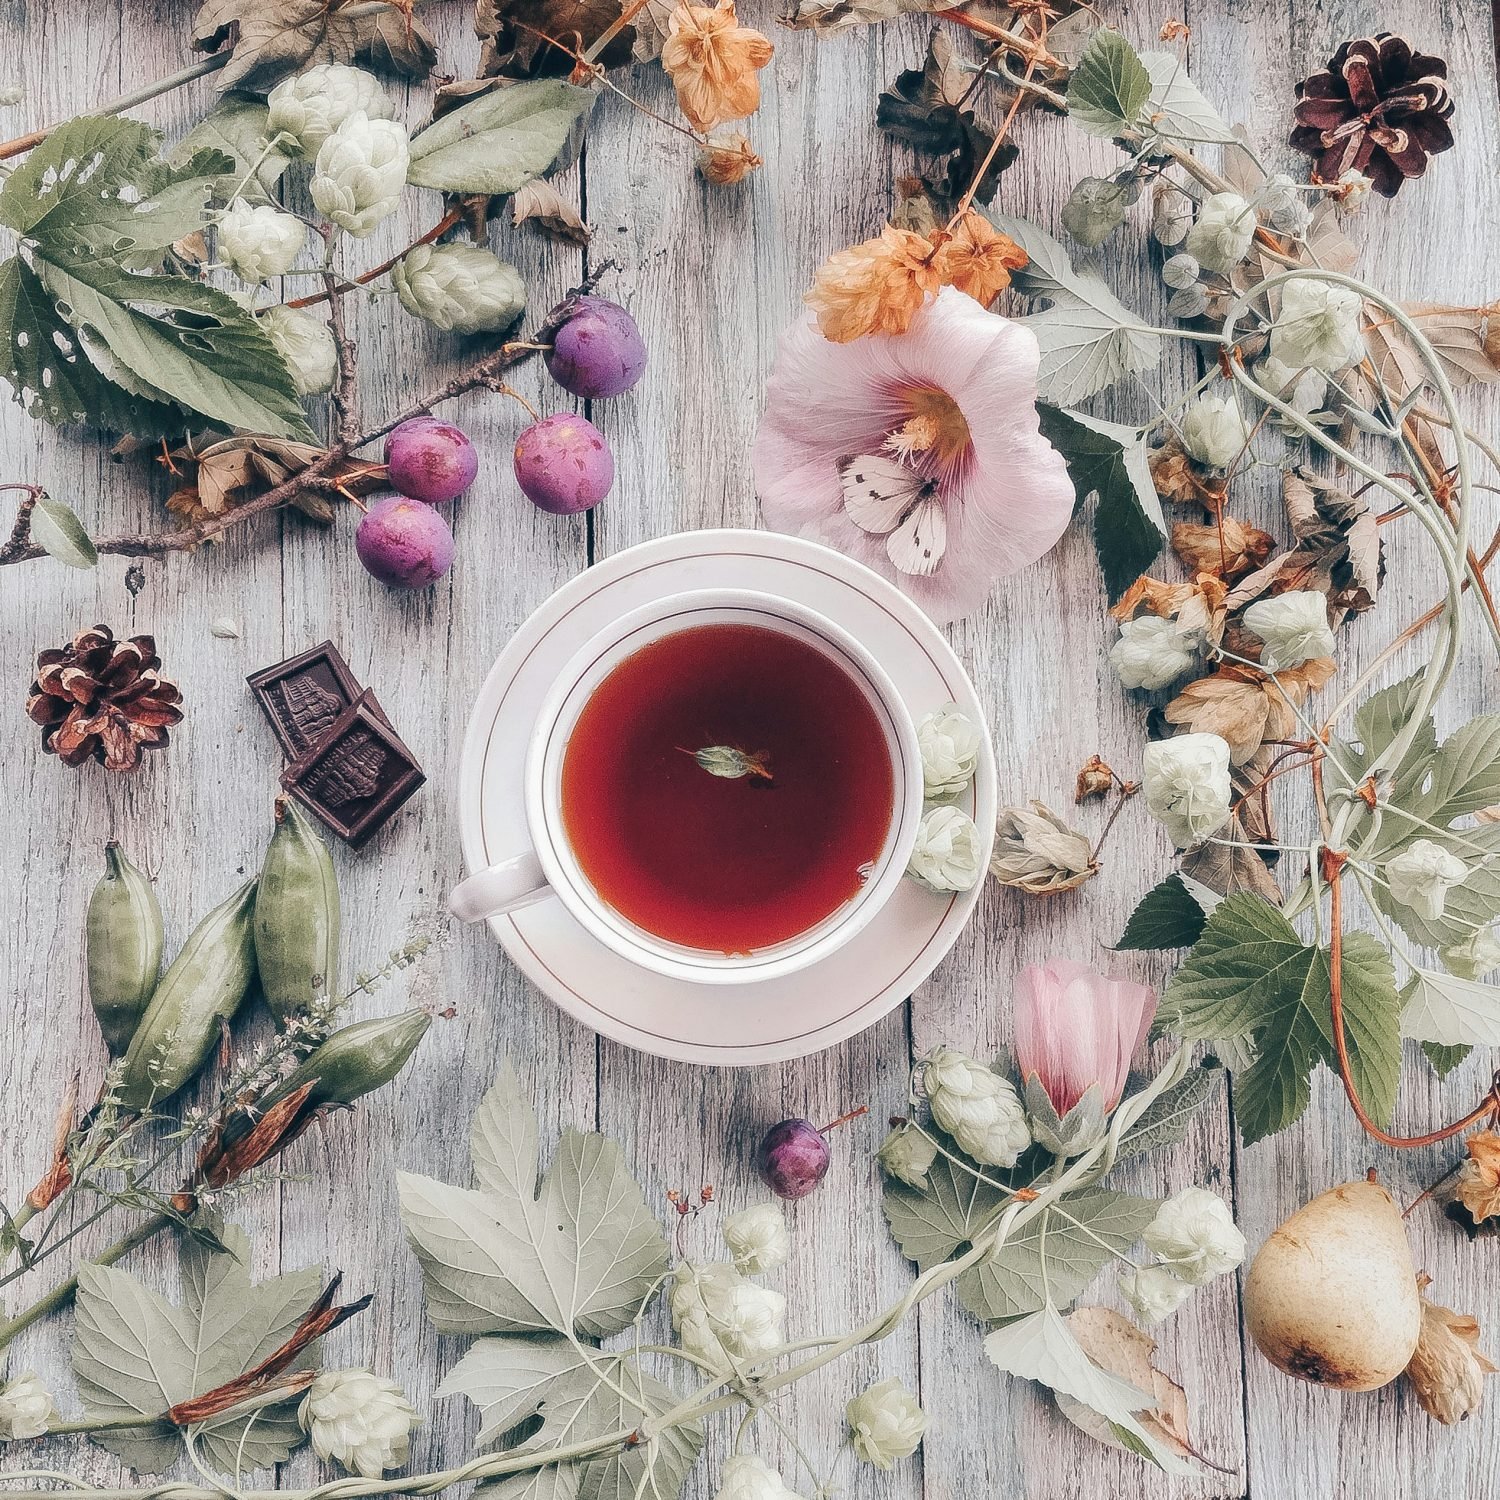 A cup of tea with a mint leaf, surrounded by scattered colorful flowers, fruits, and pine cones on a wooden surface.